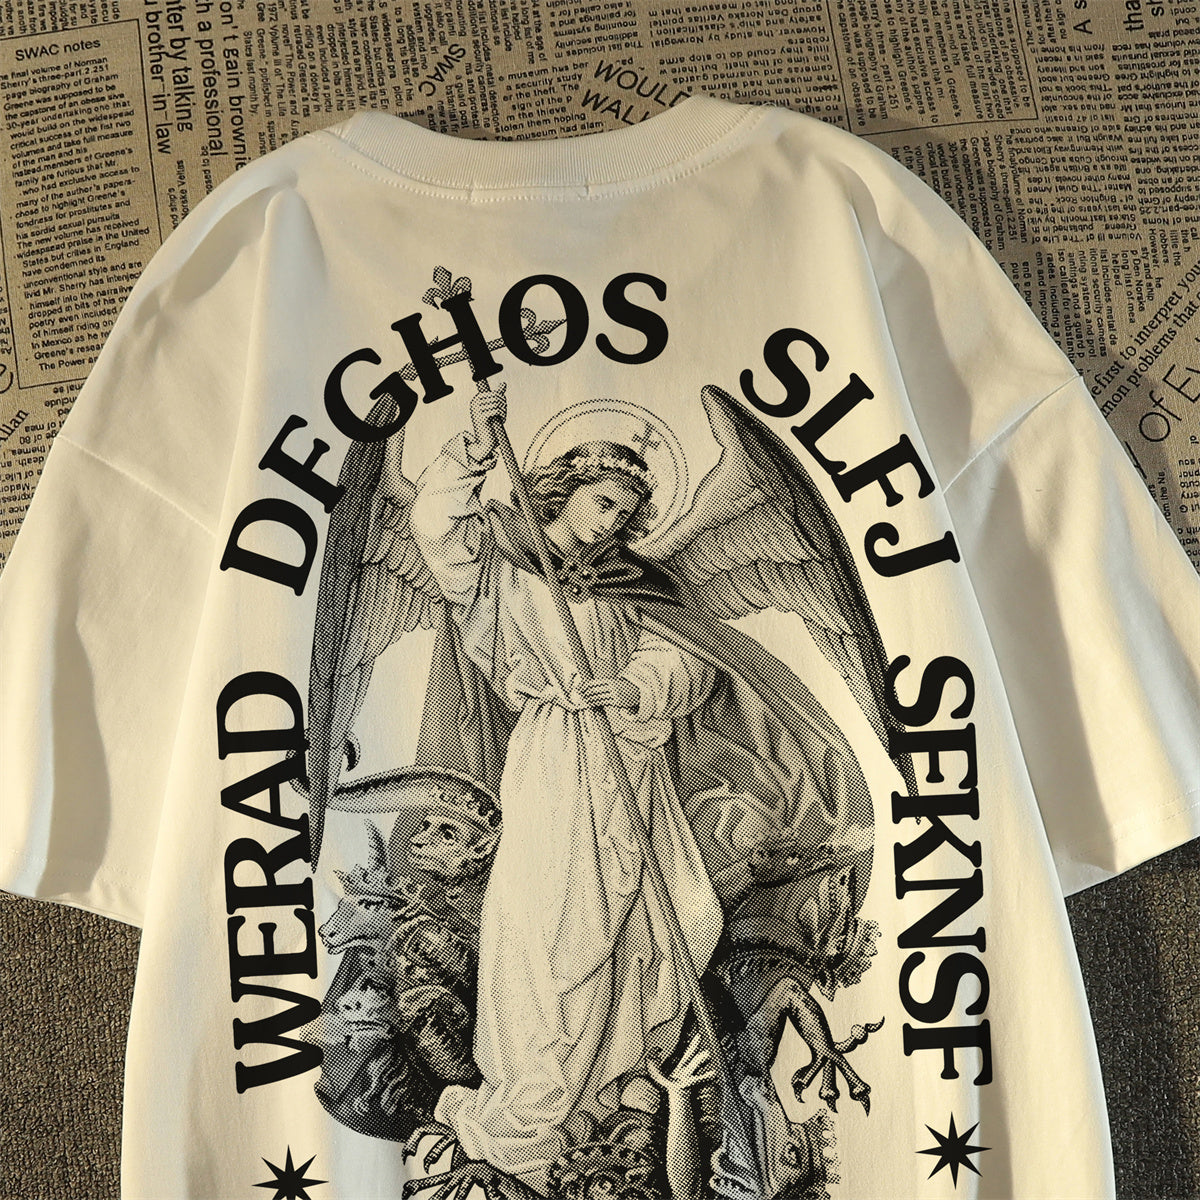 Unisex St. Michael fights the dragon cotton printed T-shirt